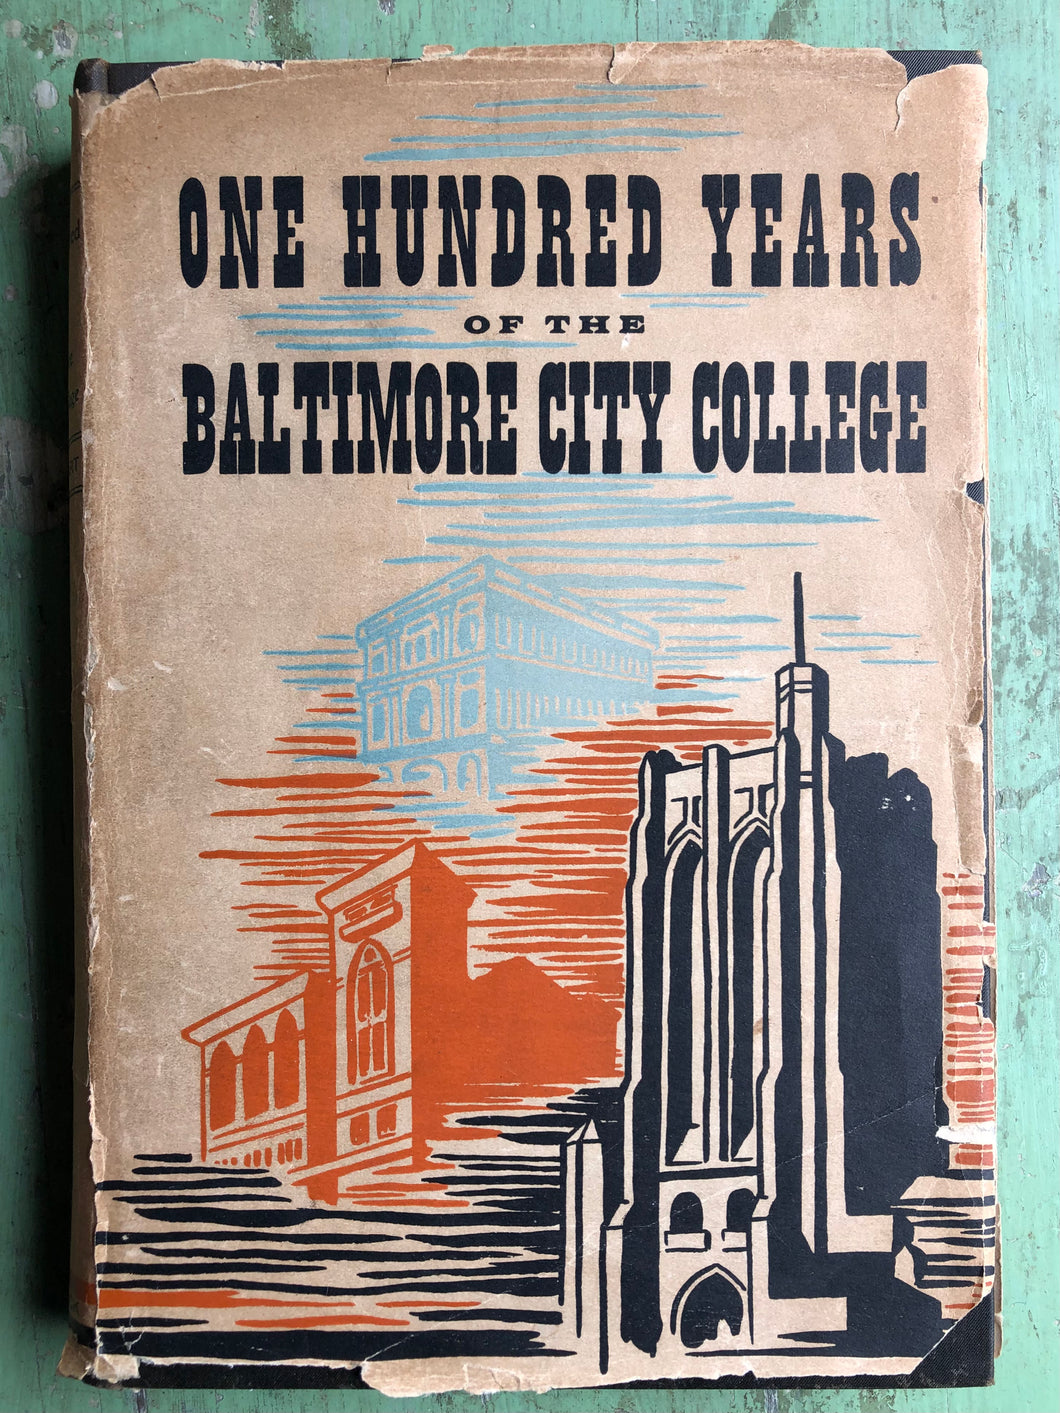 One Hundred Years of the Baltimore City College by James Chancellor Leonhart